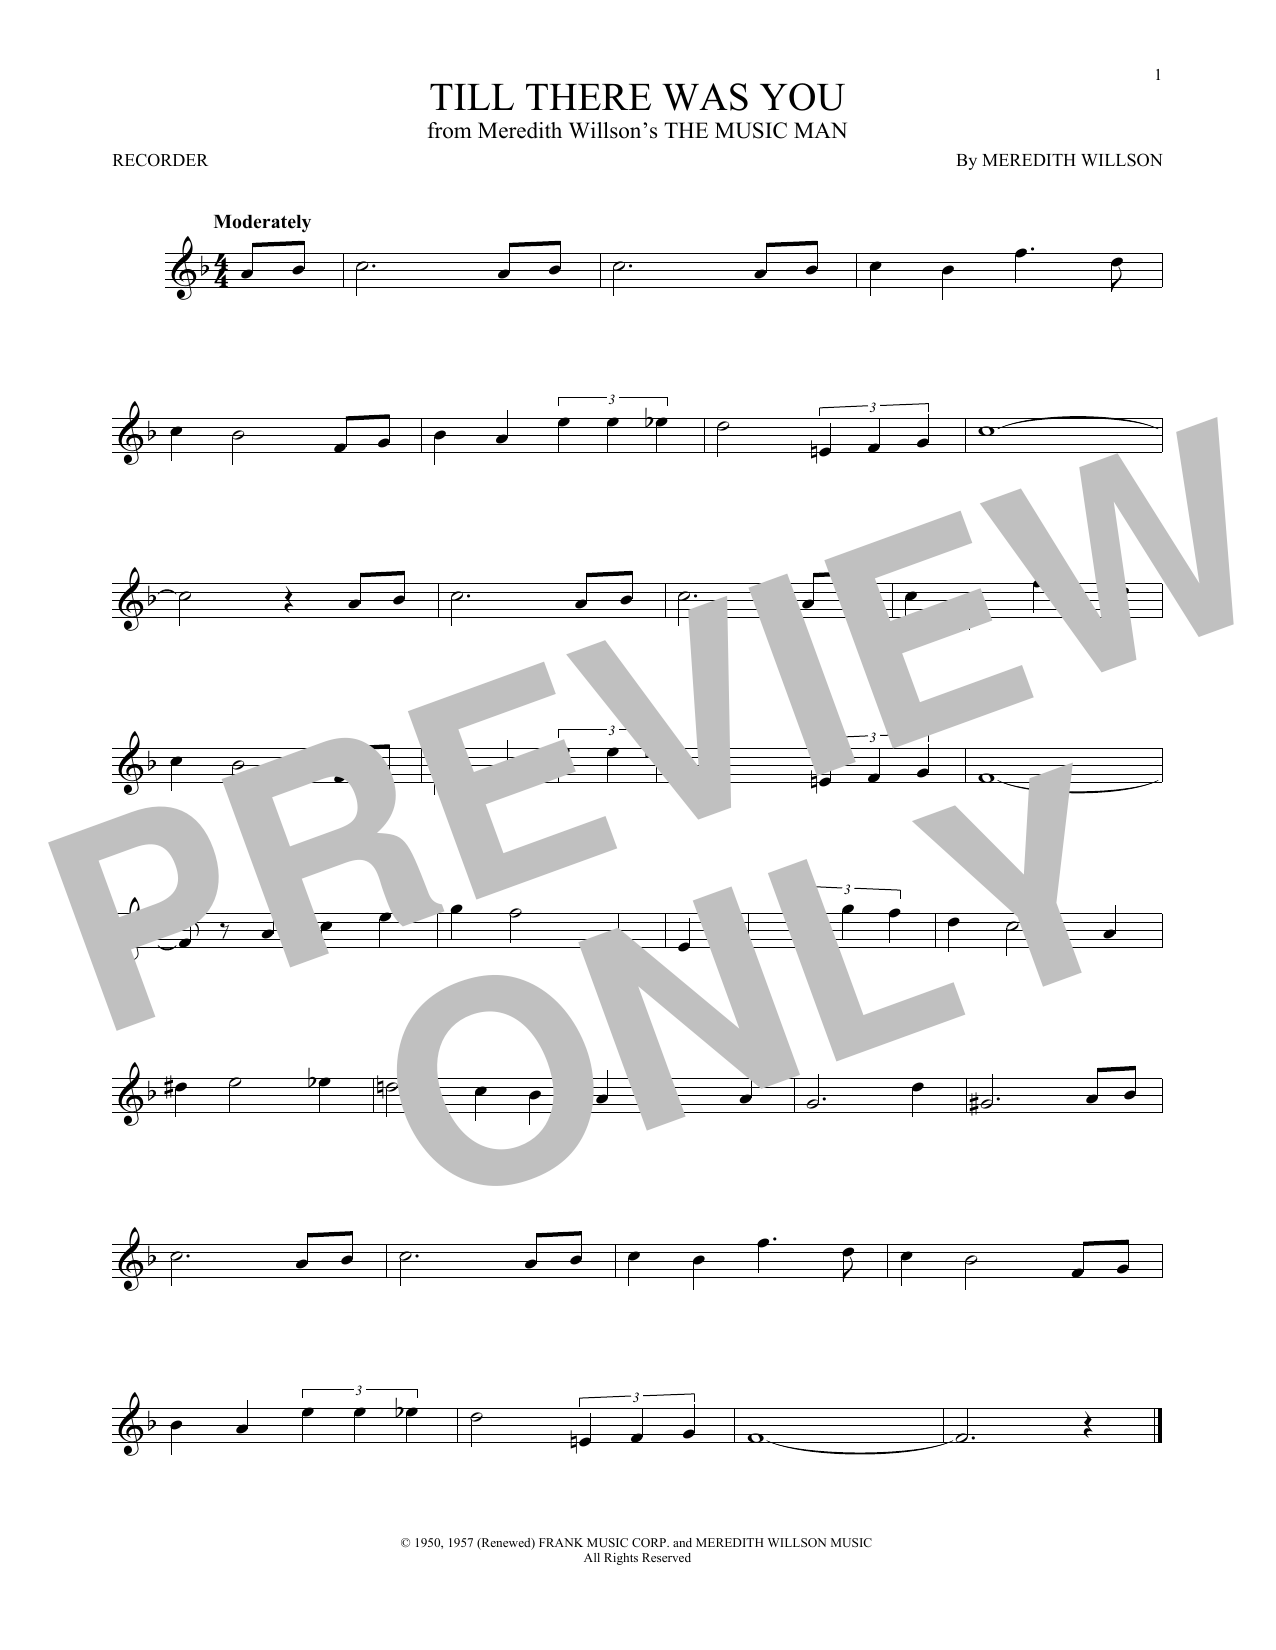 Download Meredith Willson Till There Was You (from The Music Man) Sheet Music